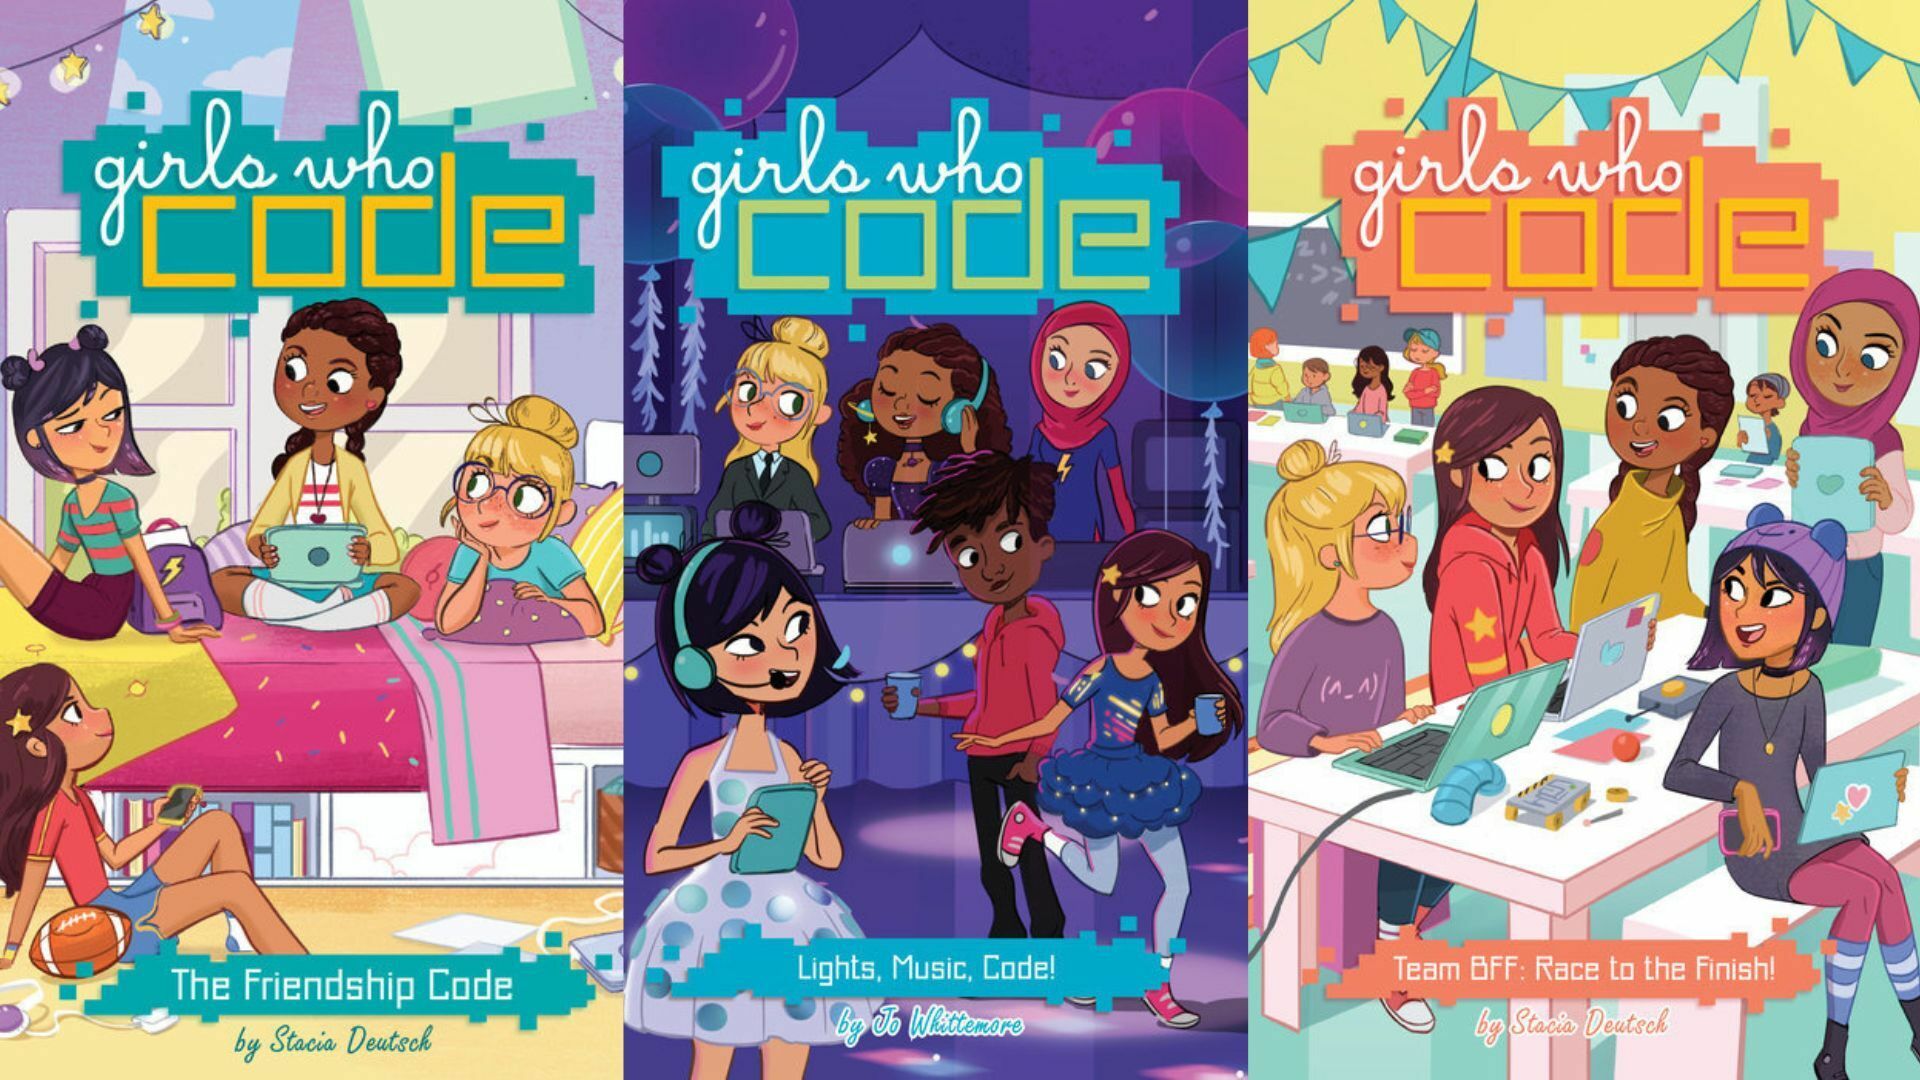 ‘Girls Who Code’ book series temporarily banned in Pennsylvania school district